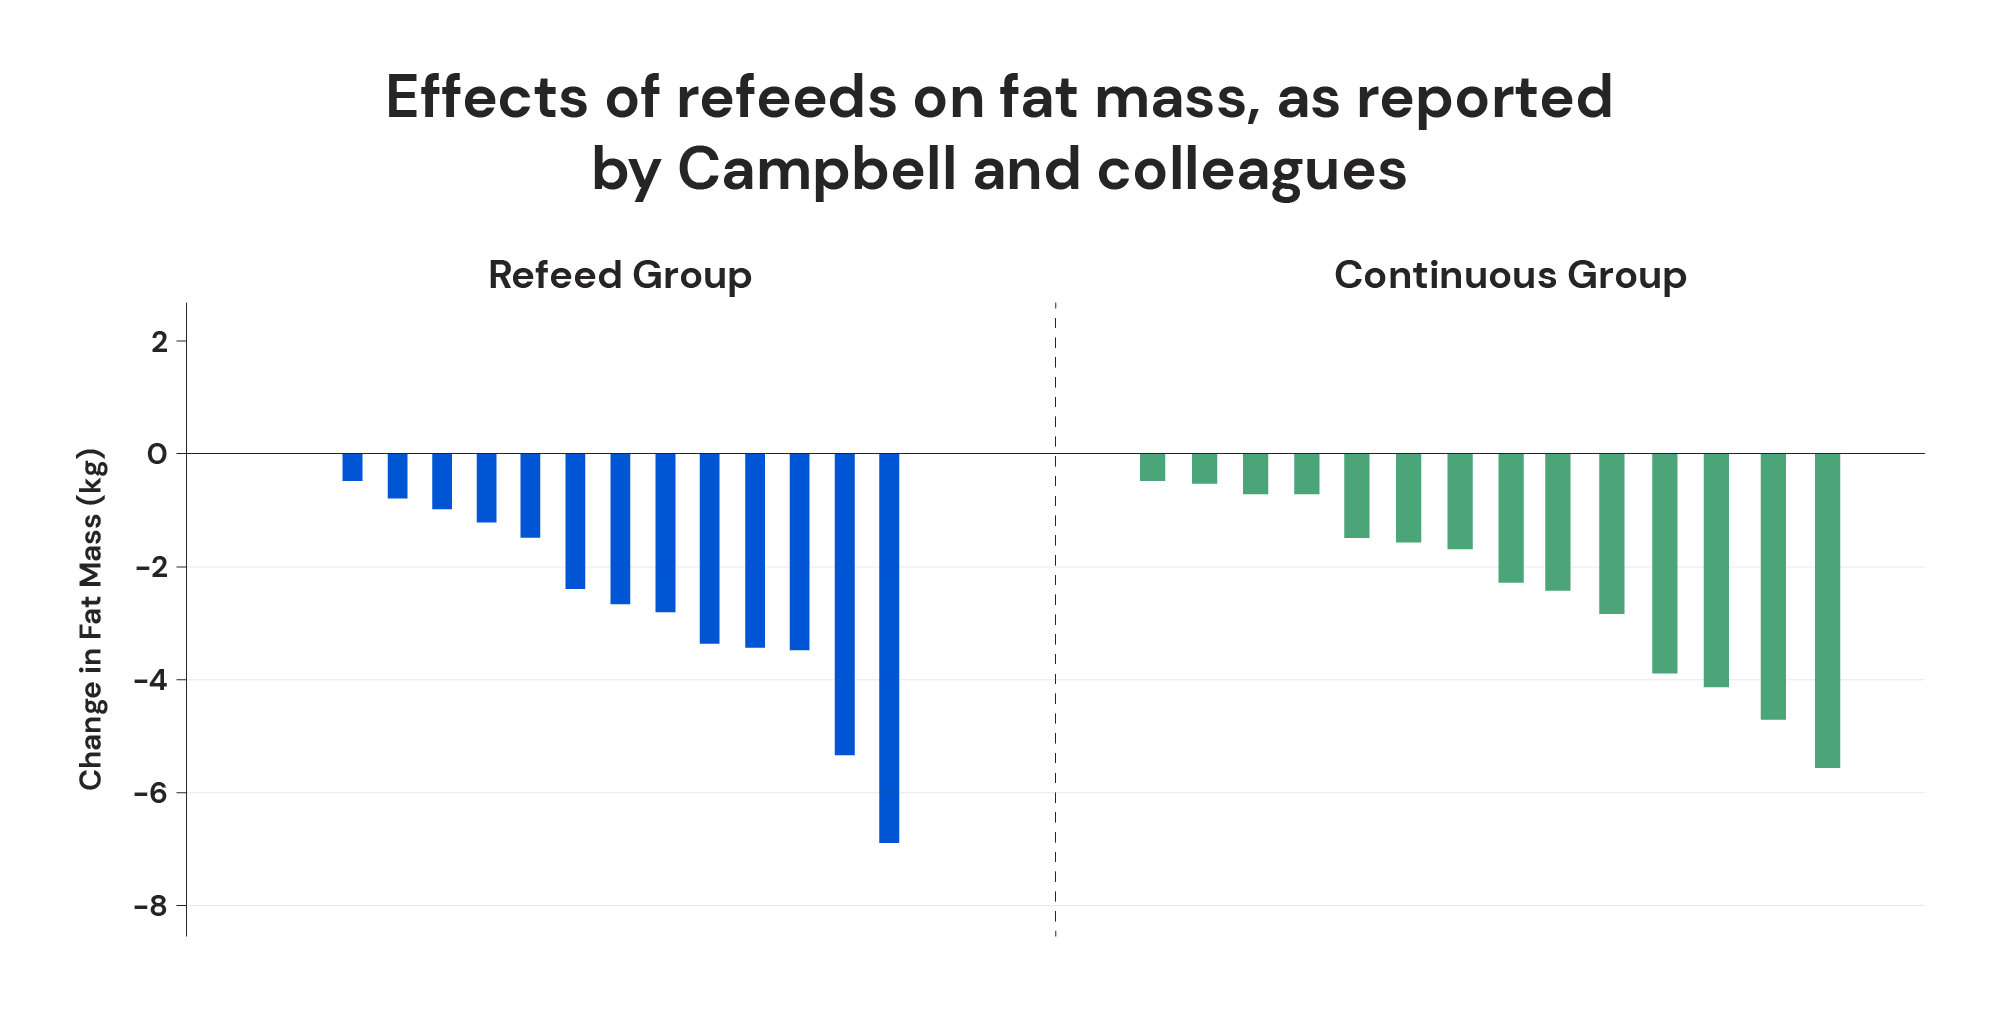 Effects of refeeds on fat mass, as reported by Campbell and colleagues